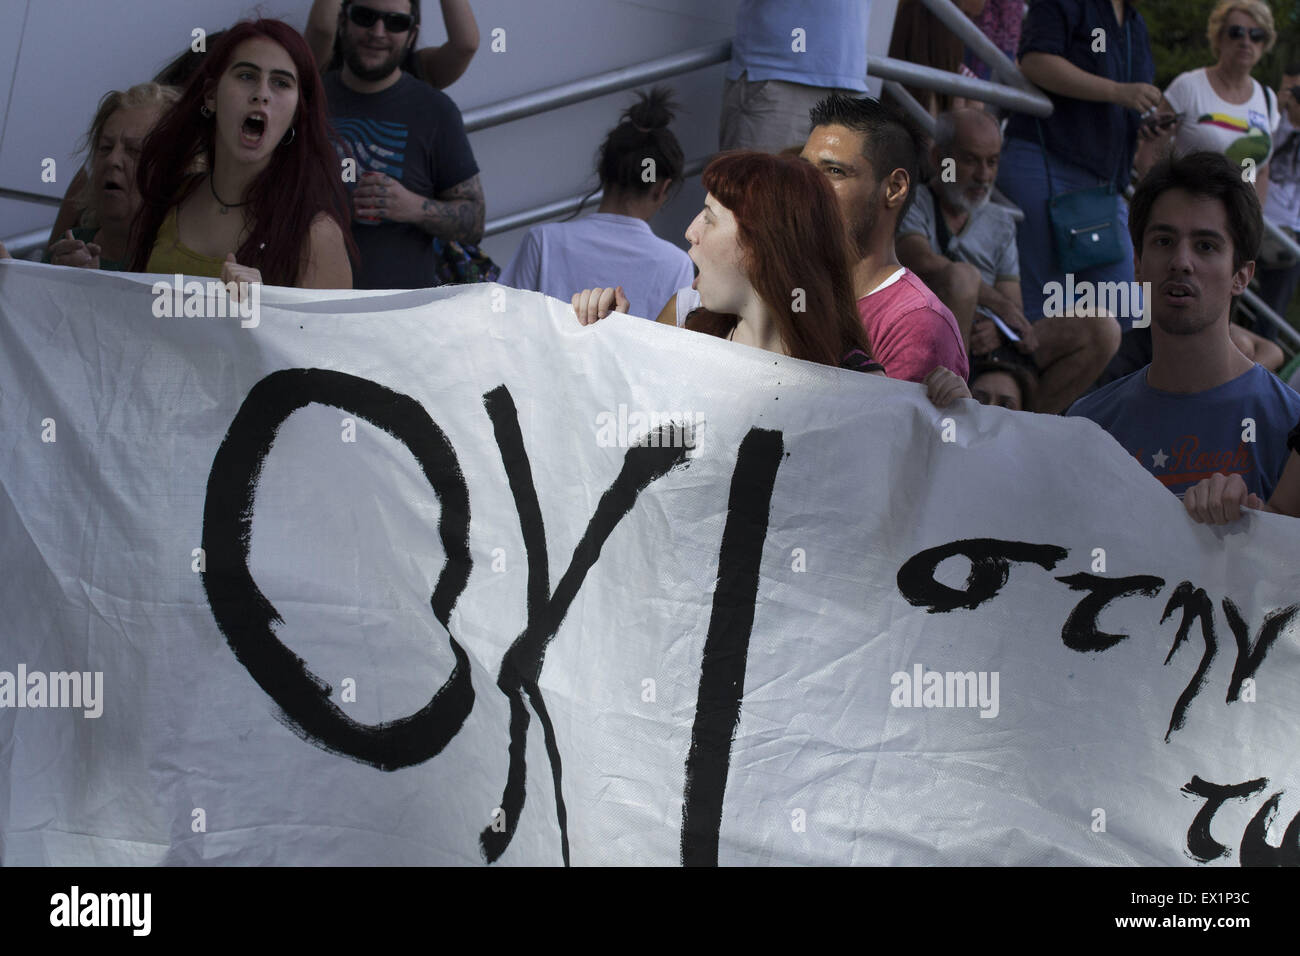 Athens, Greece. 4th July, 2015. Protesters shout slogans against Greek media accusing them of propaganda in favor of the Yes vote on the upcoming referendum. Greece is ranked No 91 out of 180 countries in the World Press Freedom Index, while all mainstream TV channels are owned by Greek tycoons. Credit:  Nikolas Georgiou/ZUMA Wire/ZUMAPRESS.com/Alamy Live News Stock Photo